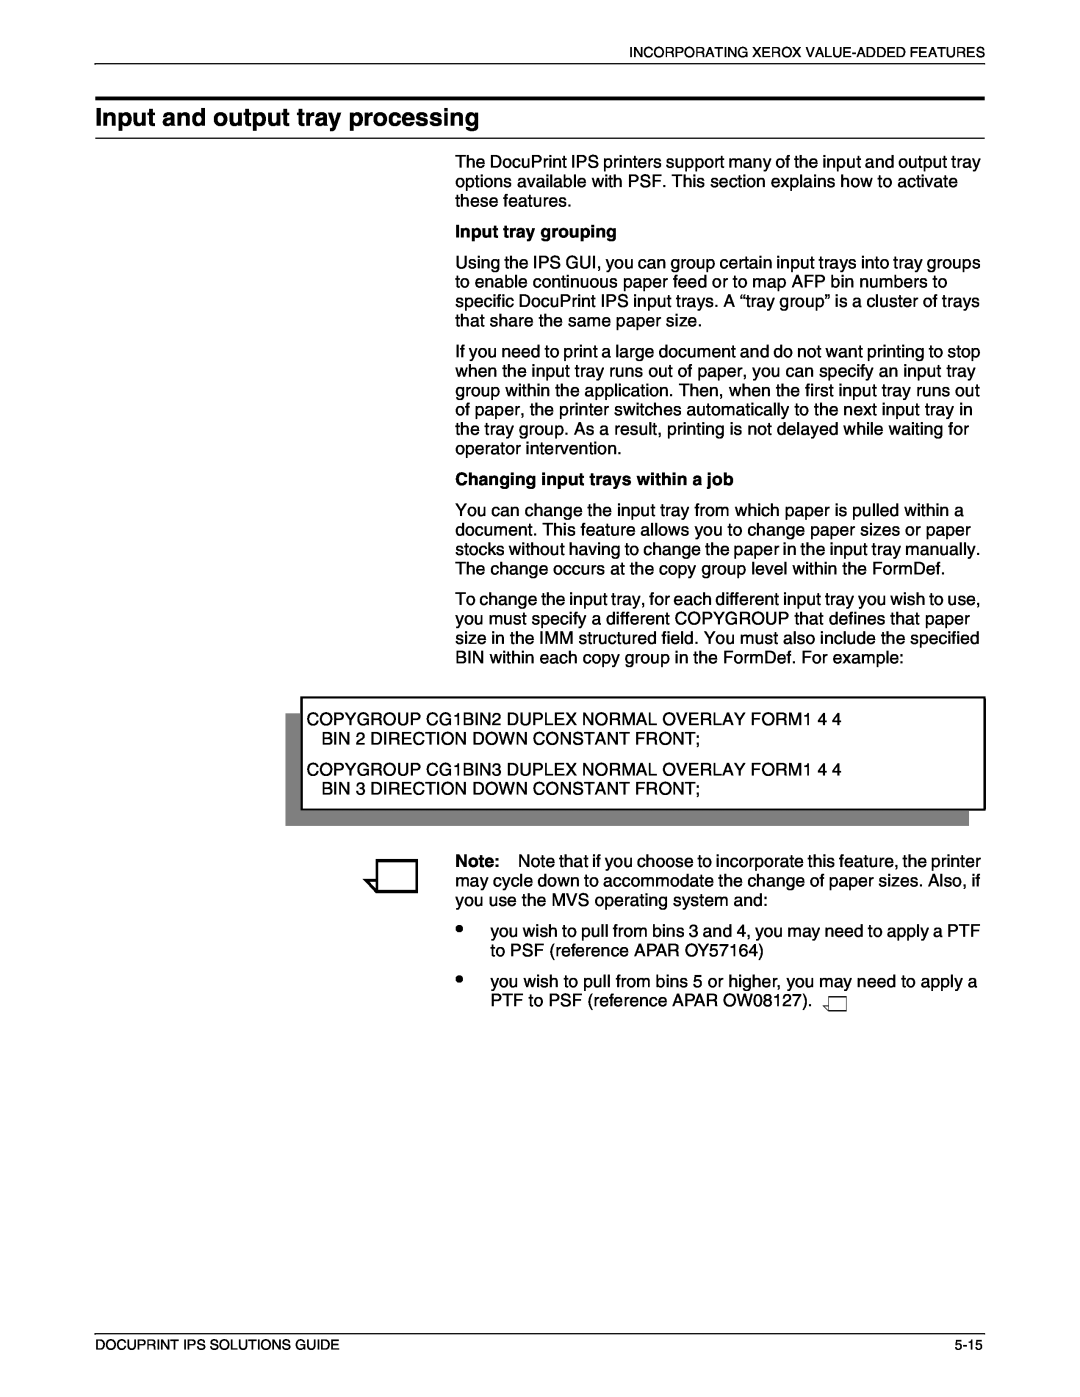 Xerox 721P88200 manual Input and output tray processing, Input tray grouping, Changing input trays within a job 